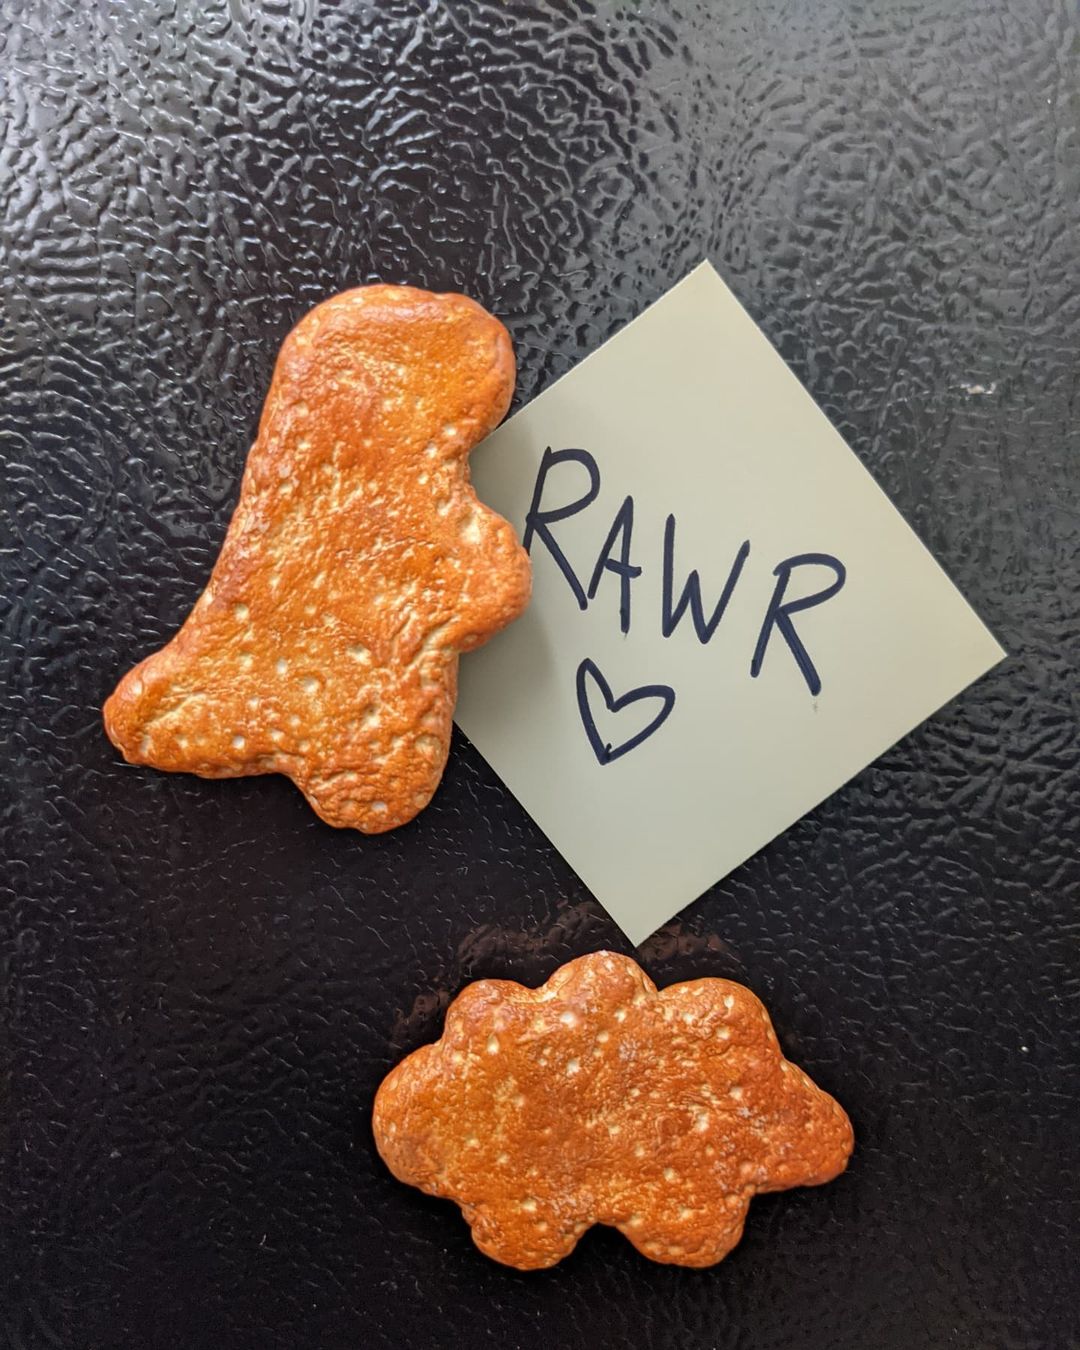 4. @inedible_treats dinosaur nuggets sculpture with a note saying 'rawr' underneath one of the nuggets